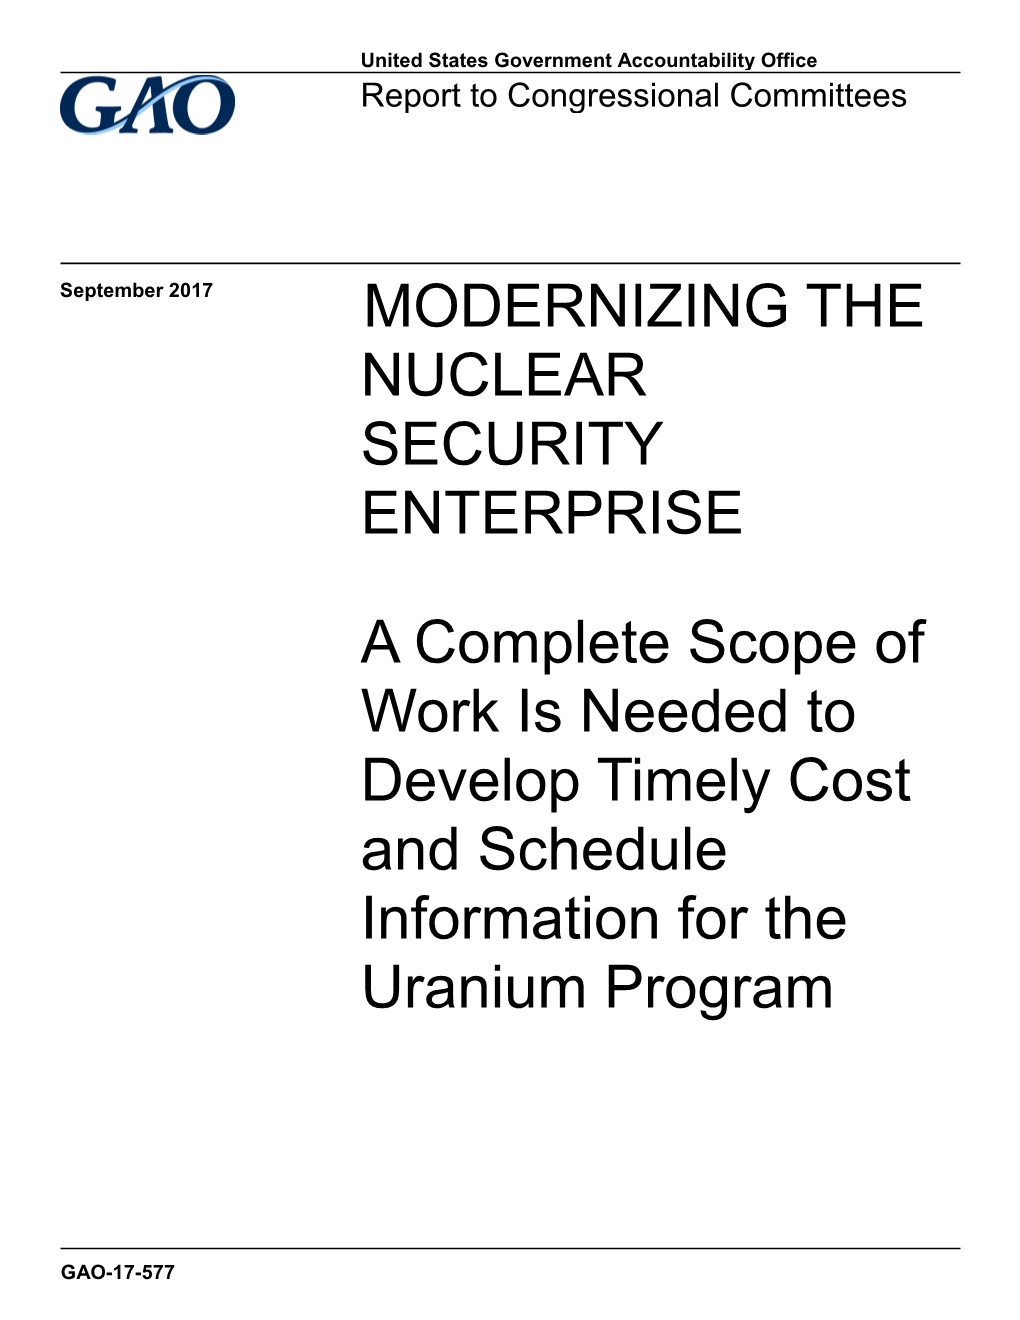 Gao-17-577, Modernizing the Nuclear Security